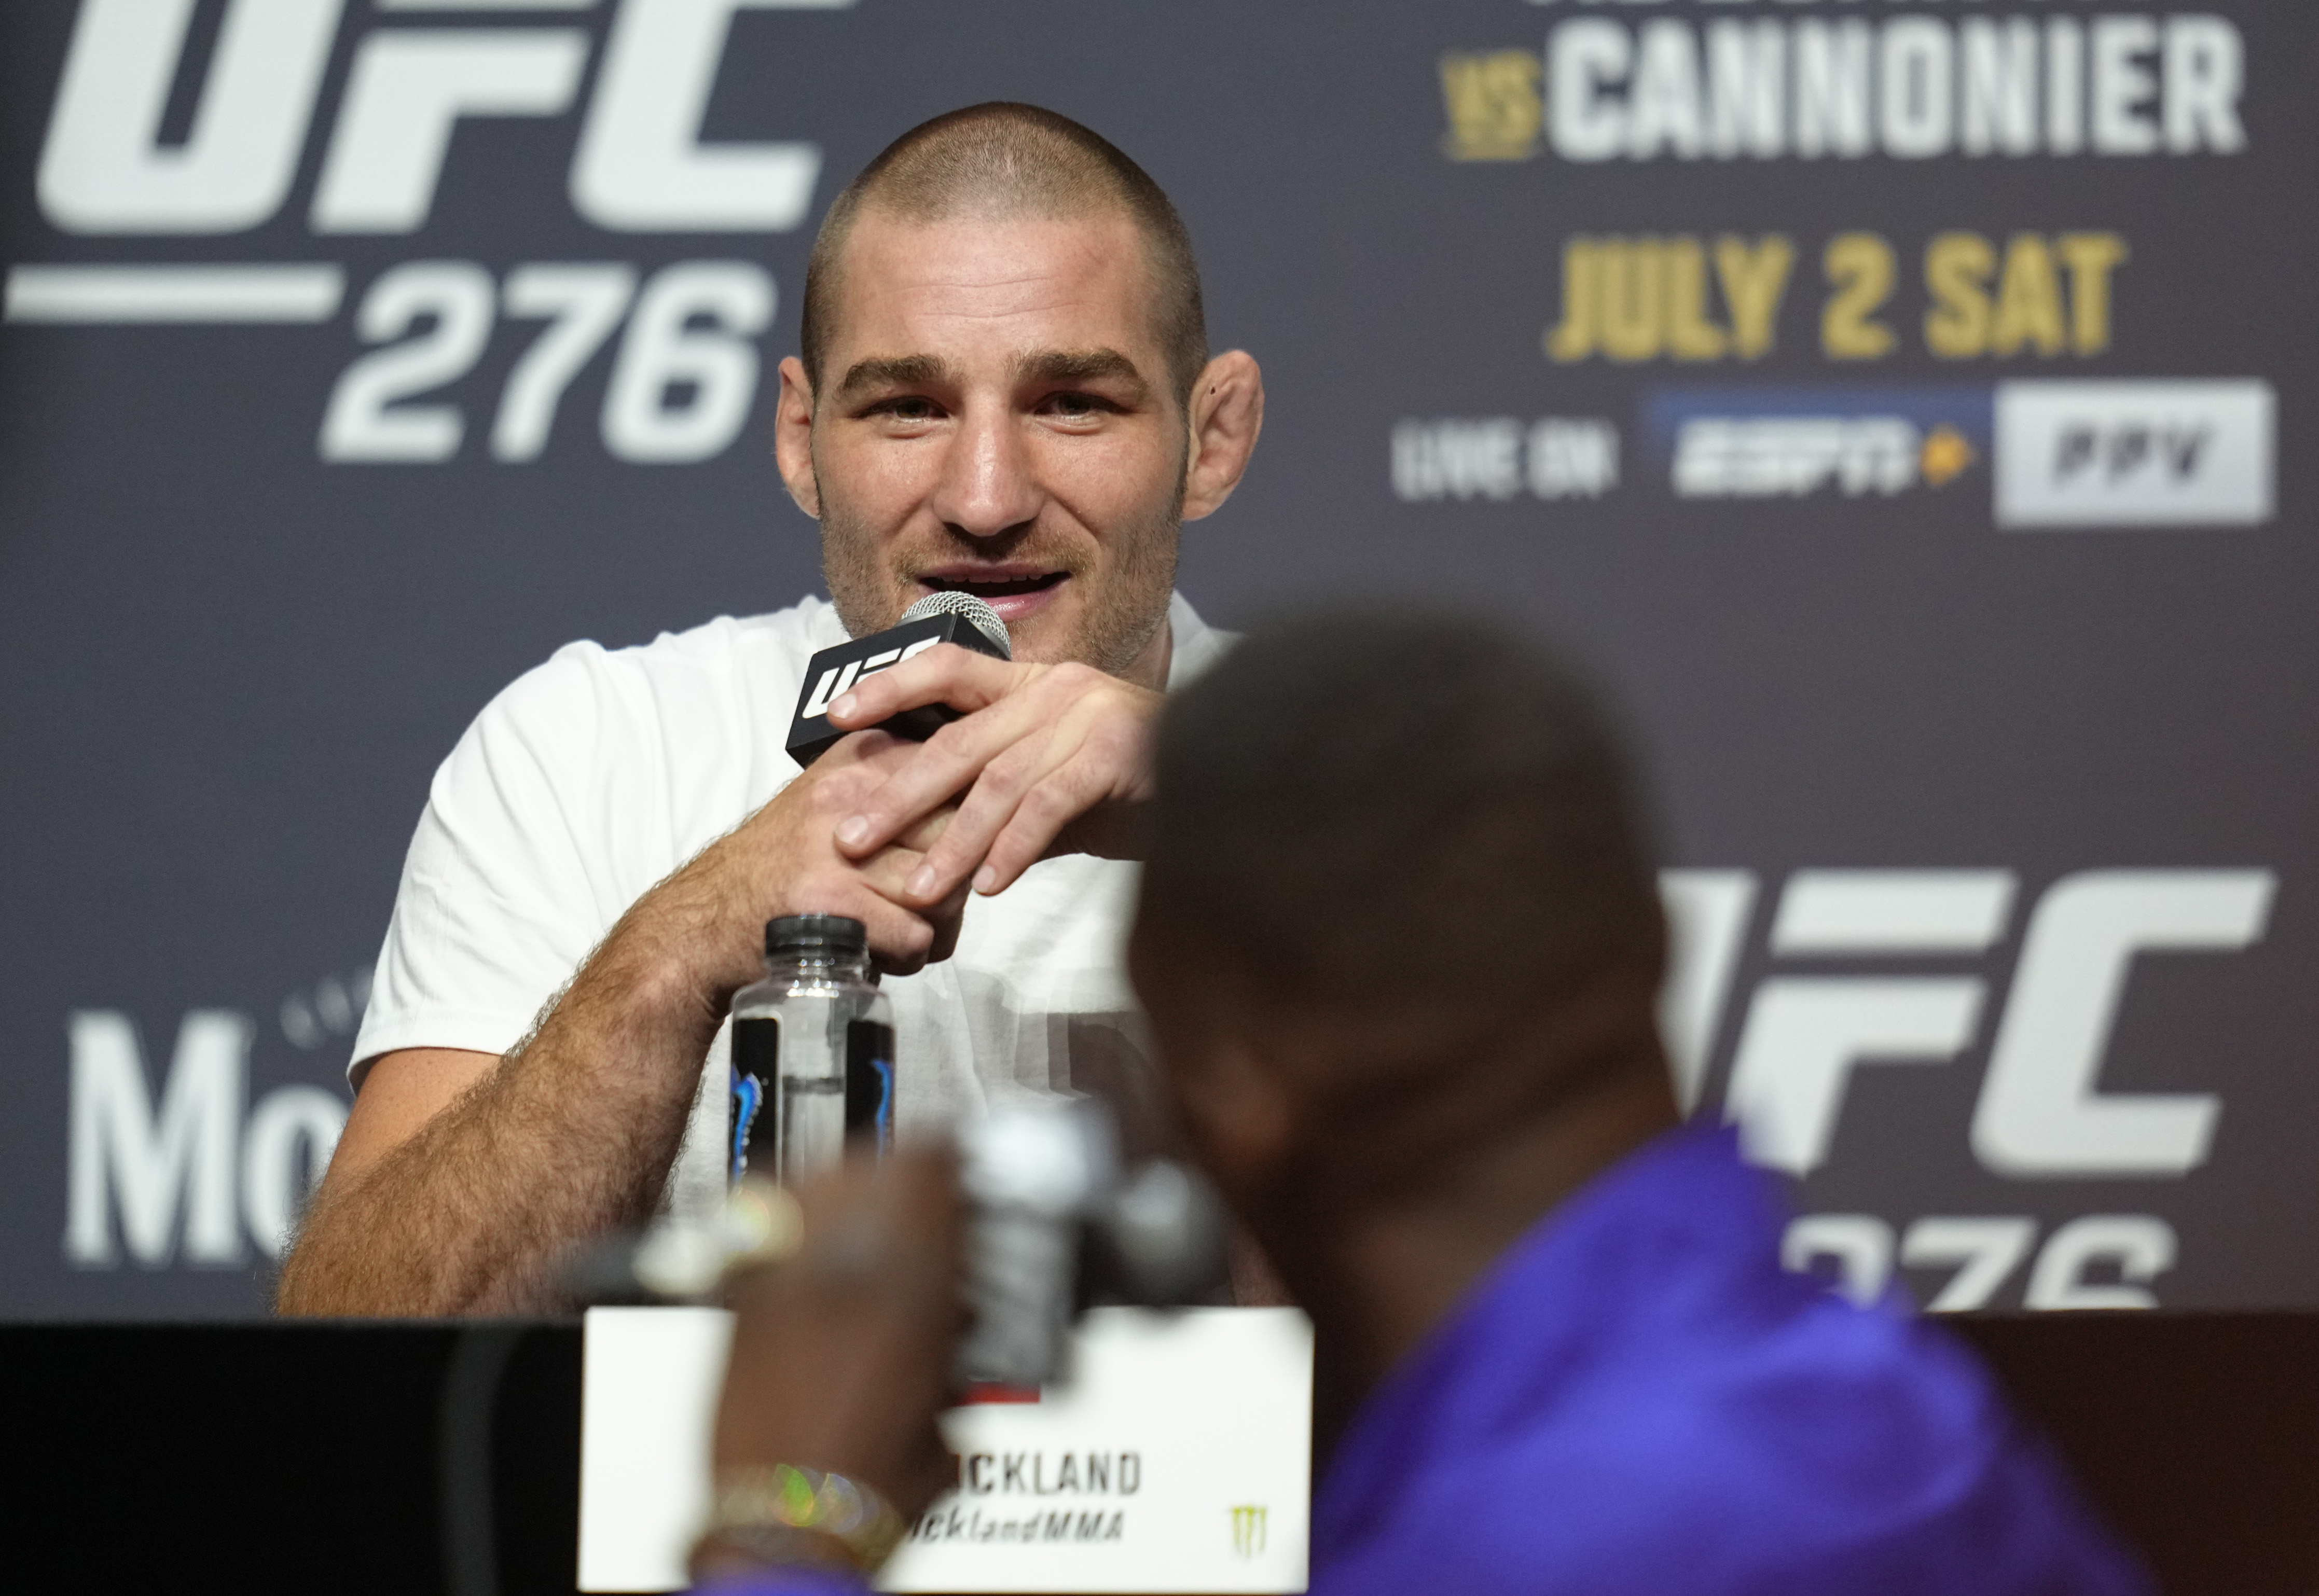 Sean Strickland and Israel Adesanya talk smack at each other during the UFC 276 pre-fight presser.